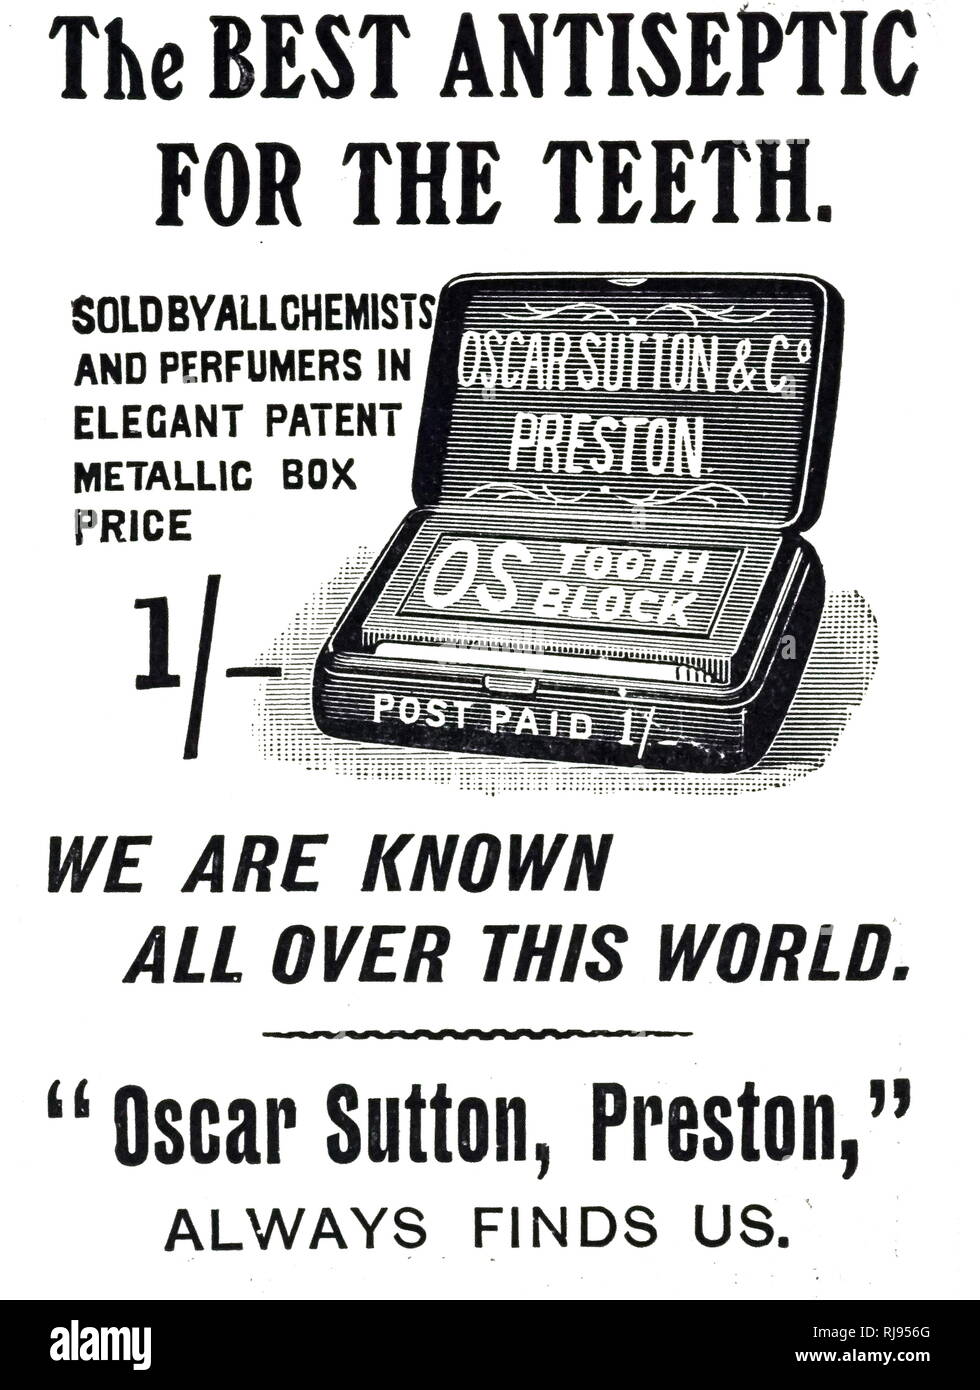 An advertisement for Sutton's dentifrice. Dated 20th century Stock Photo